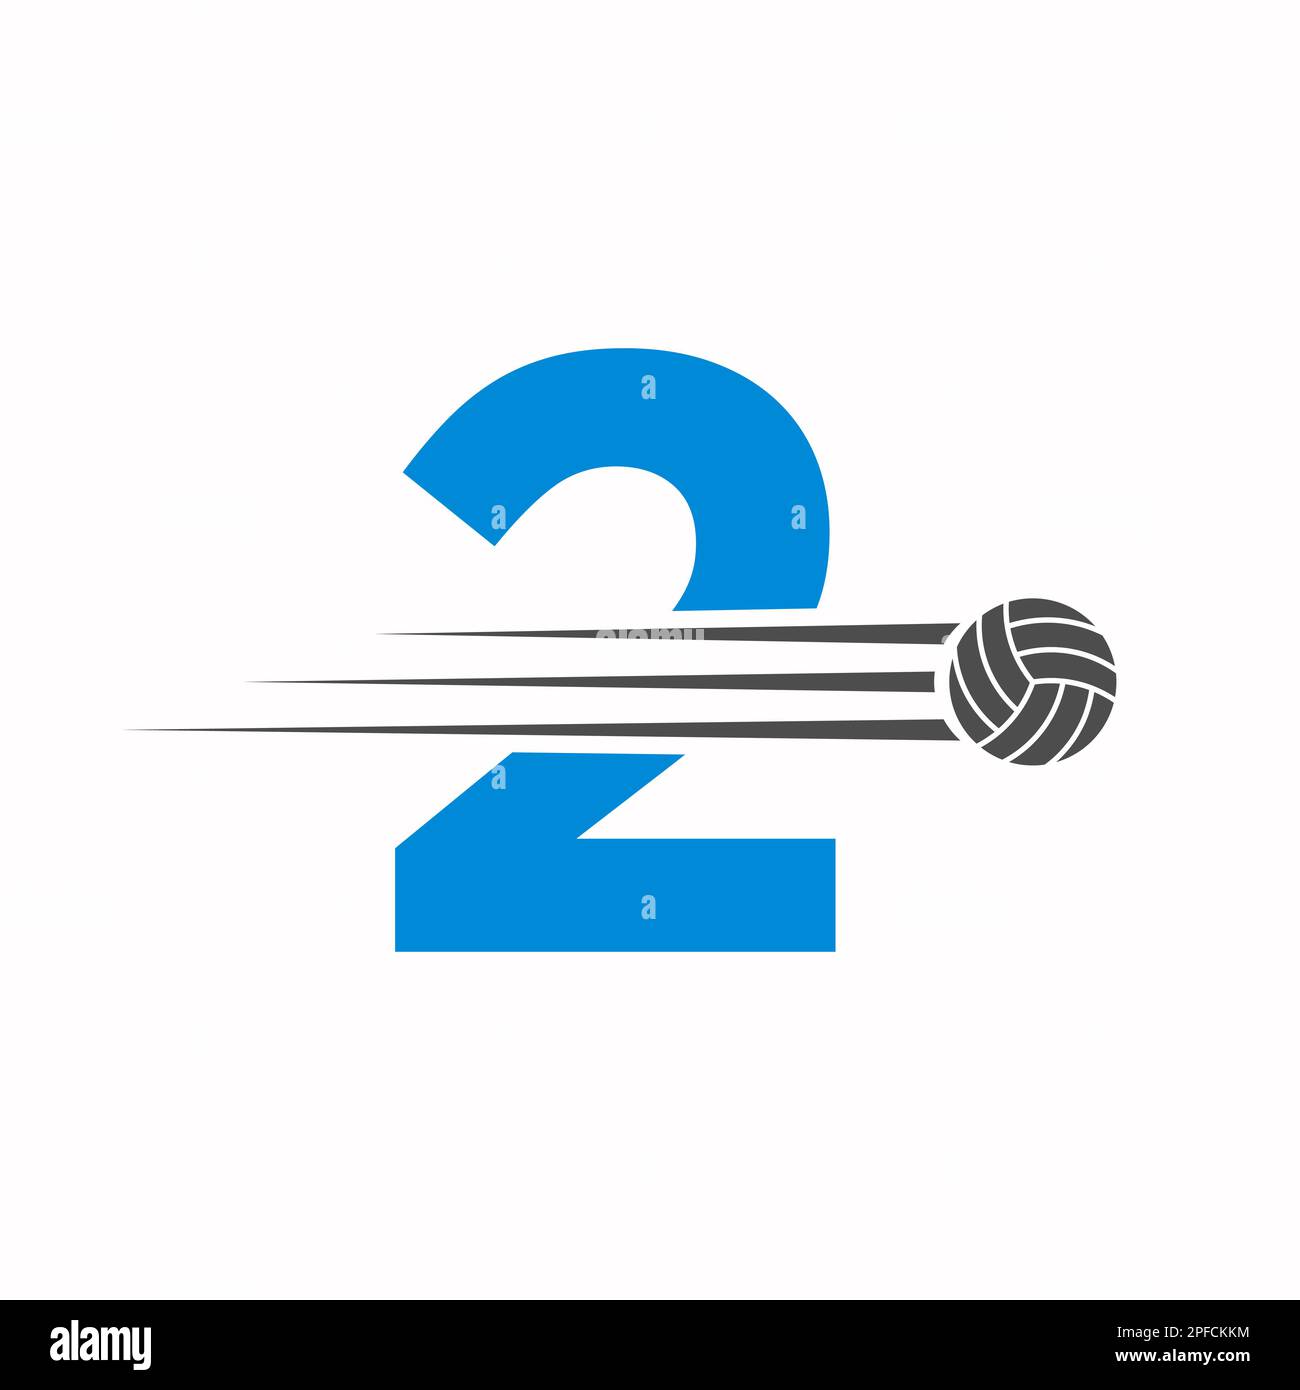 Initial Letter 2 Volleyball Logo Design Sign. Volleyball Sports Logotype Stock Vector